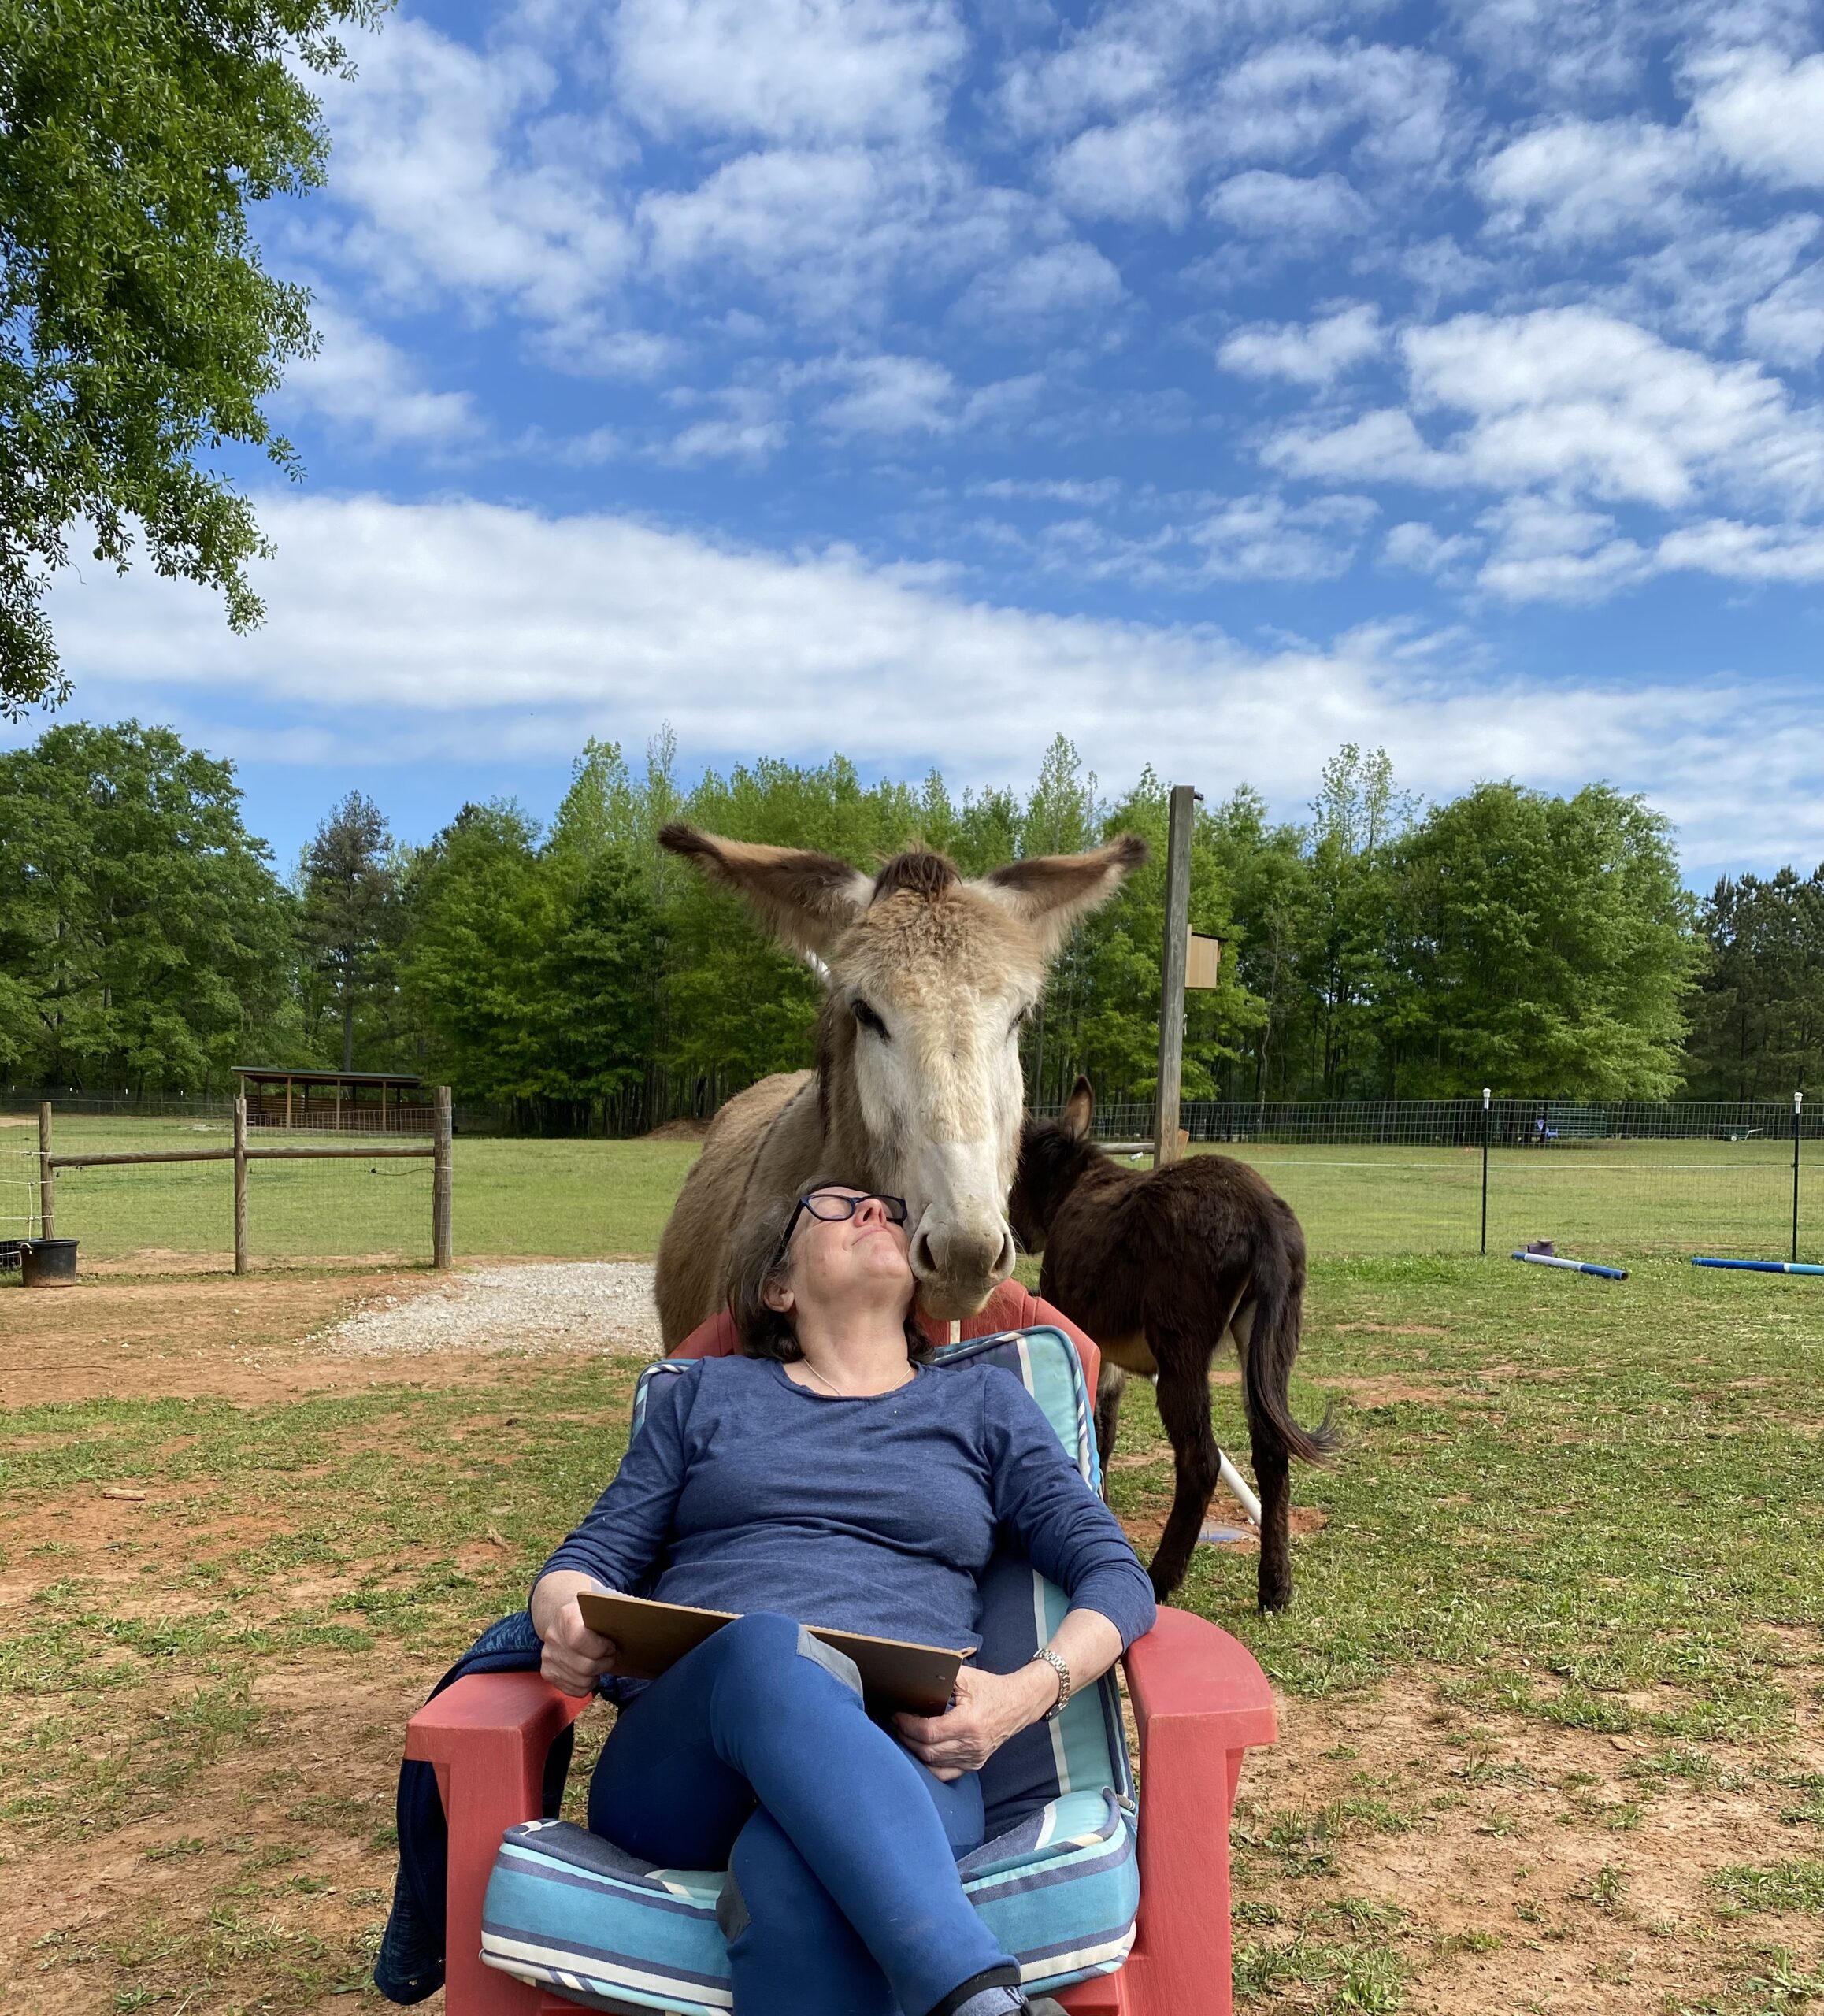 woman sitting in chair with donkey behind her